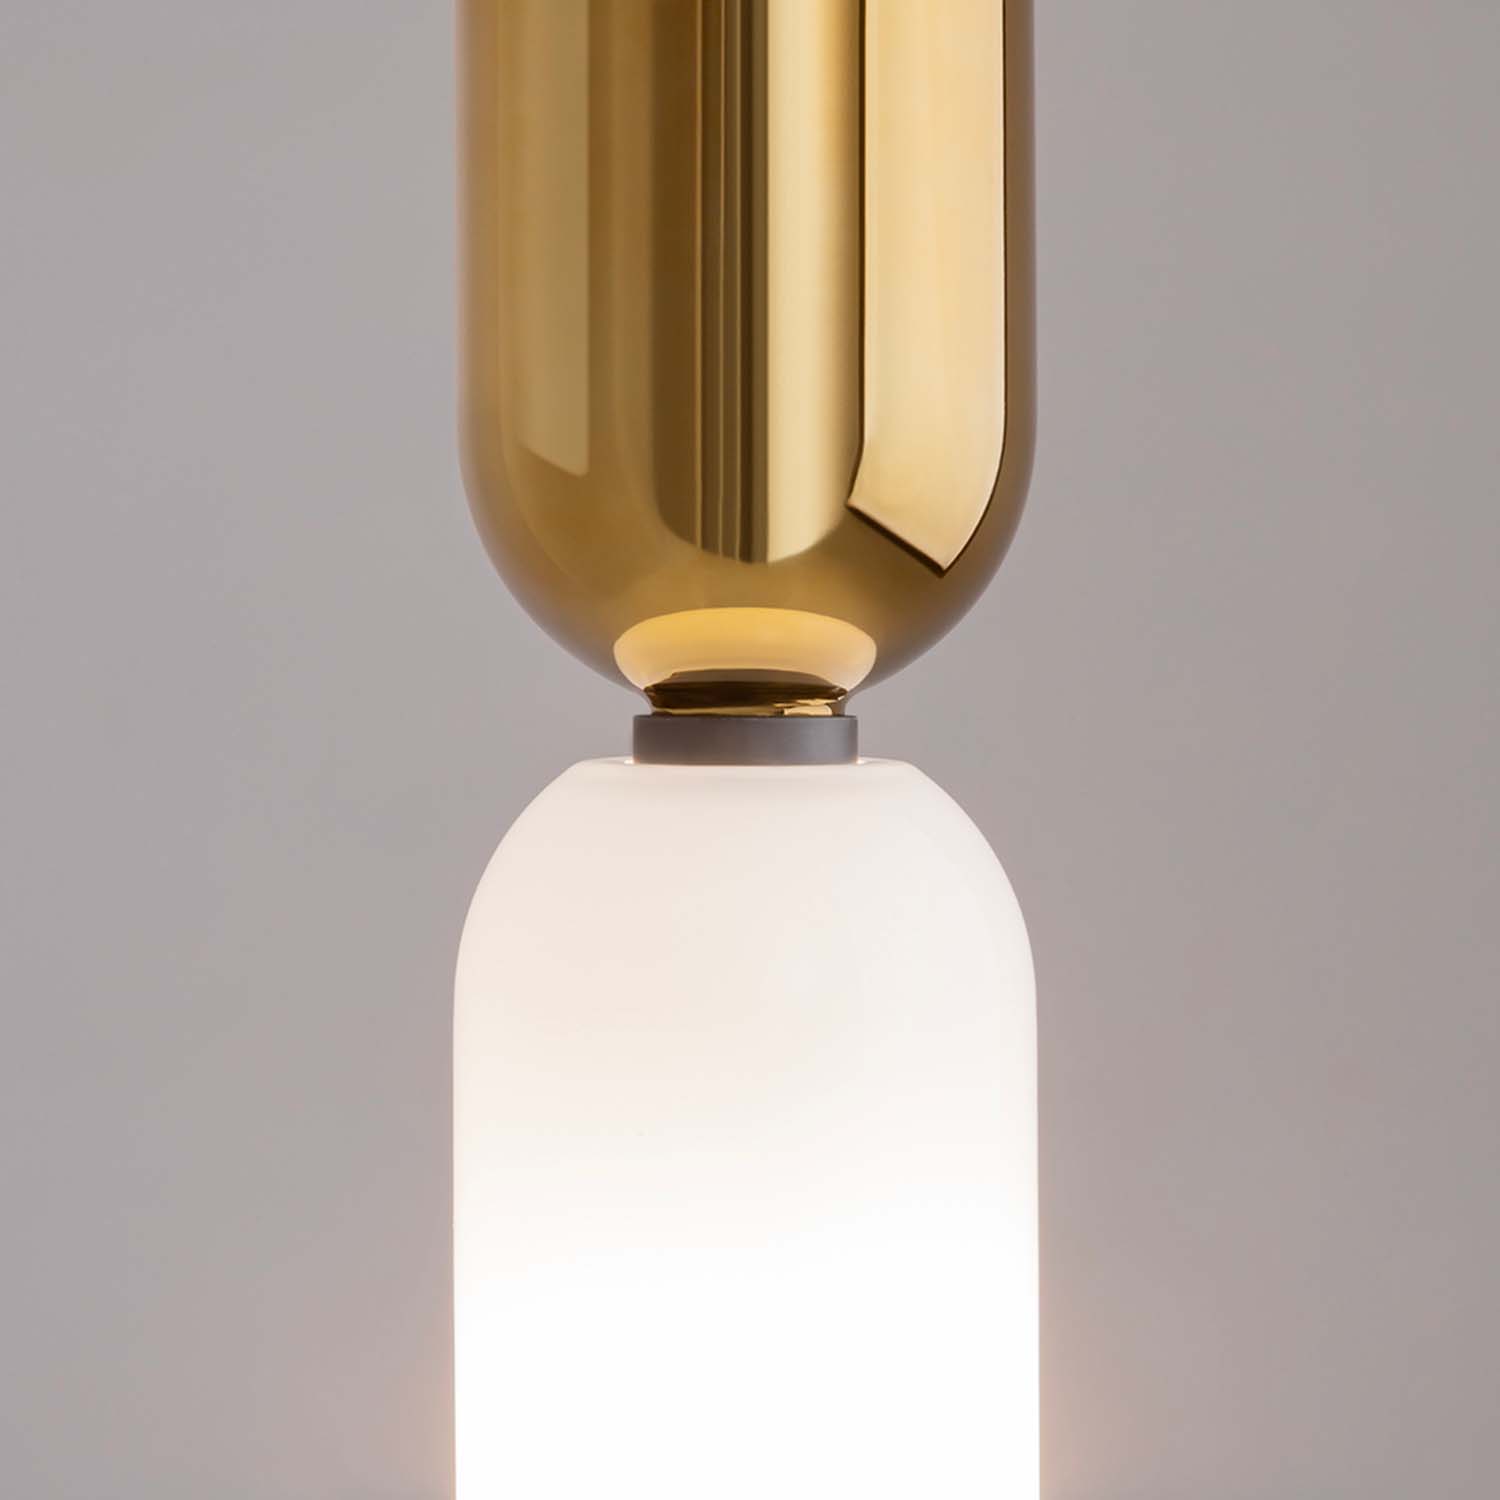 MEMORY - Two-tone designer pendant light in steel and glass